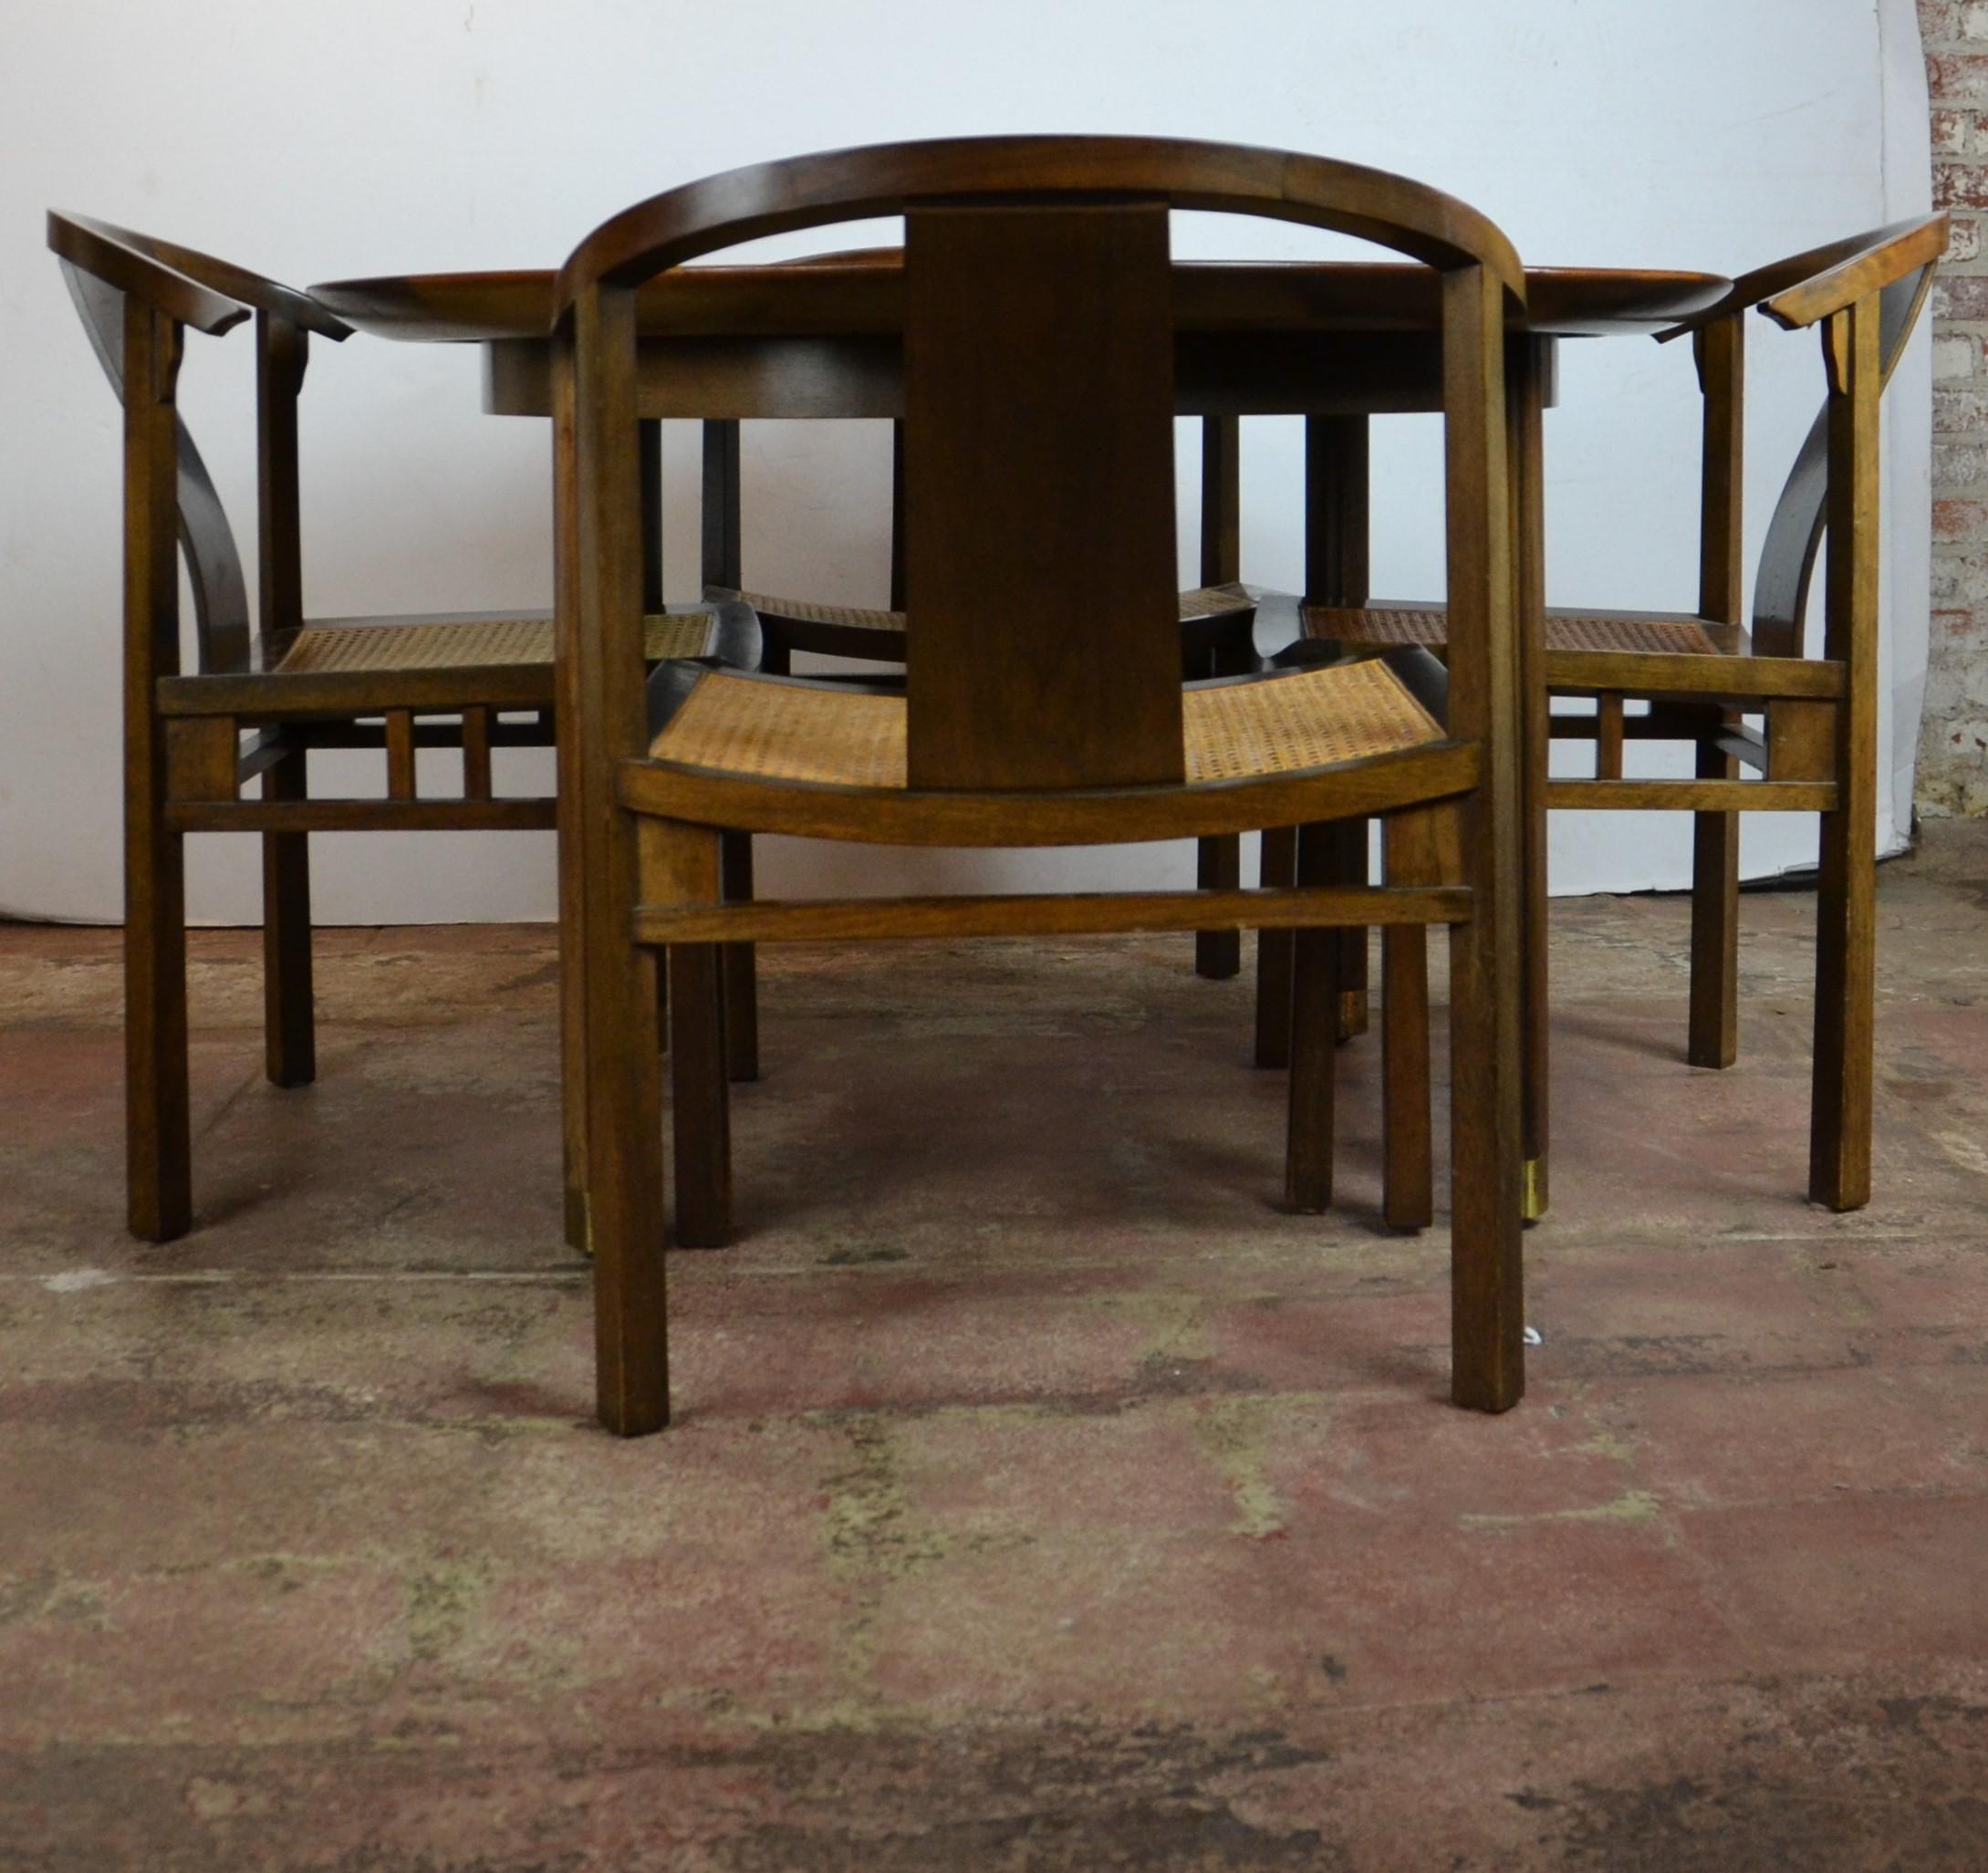 Dining set designed by Michael Tayler for Baker. The table has two leaves 14